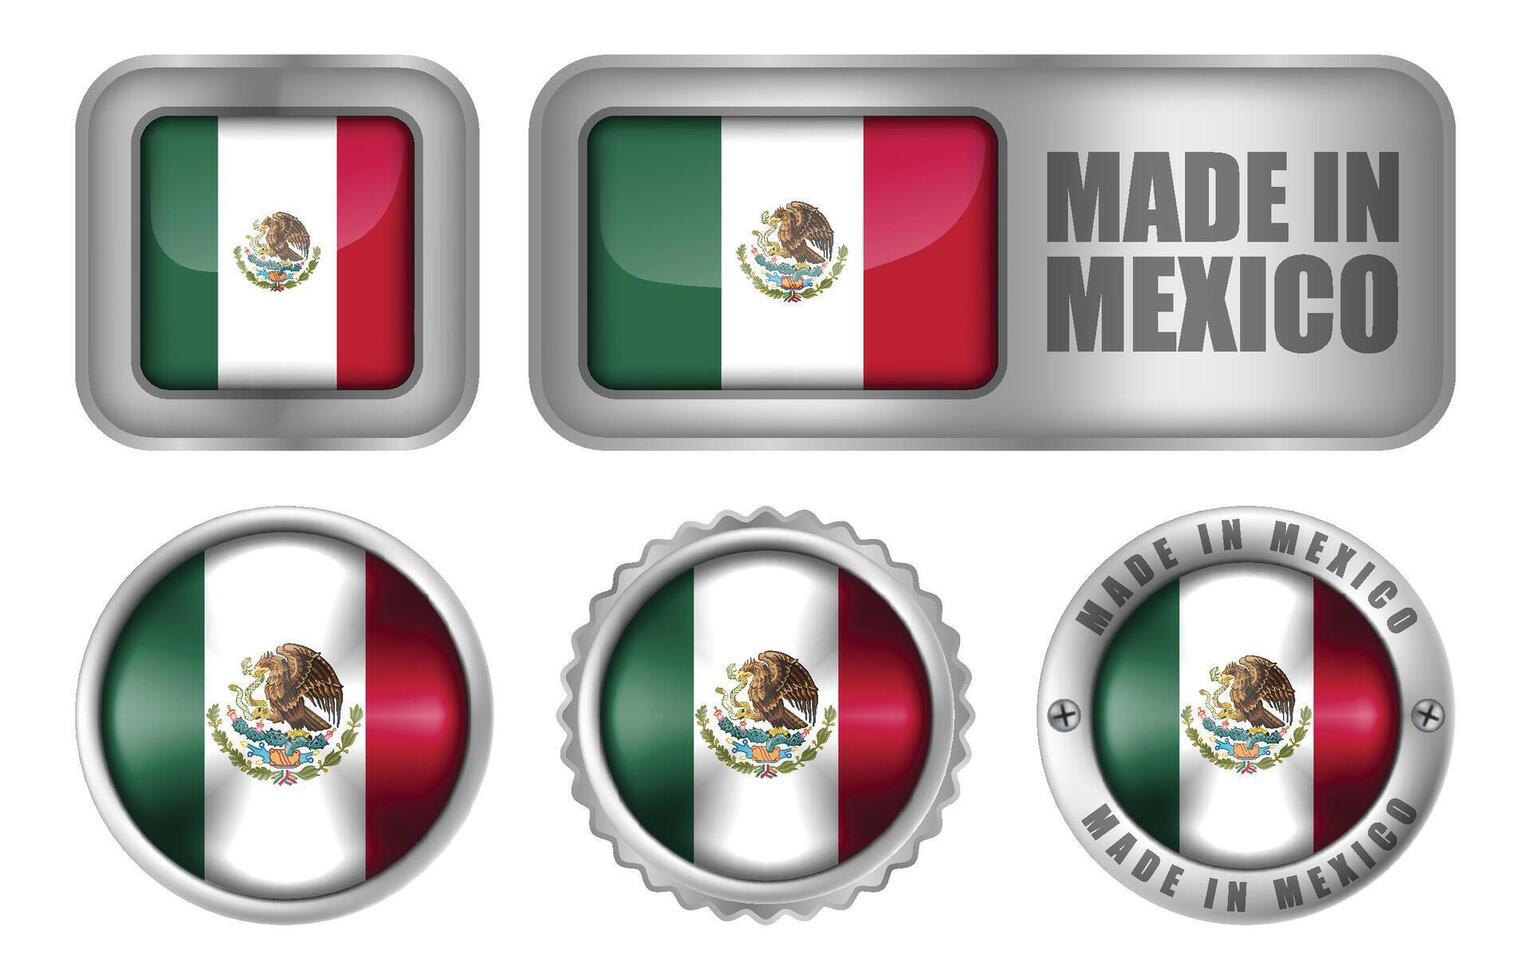 Made in Mexico Seal Badge or Sticker Design illustration vector